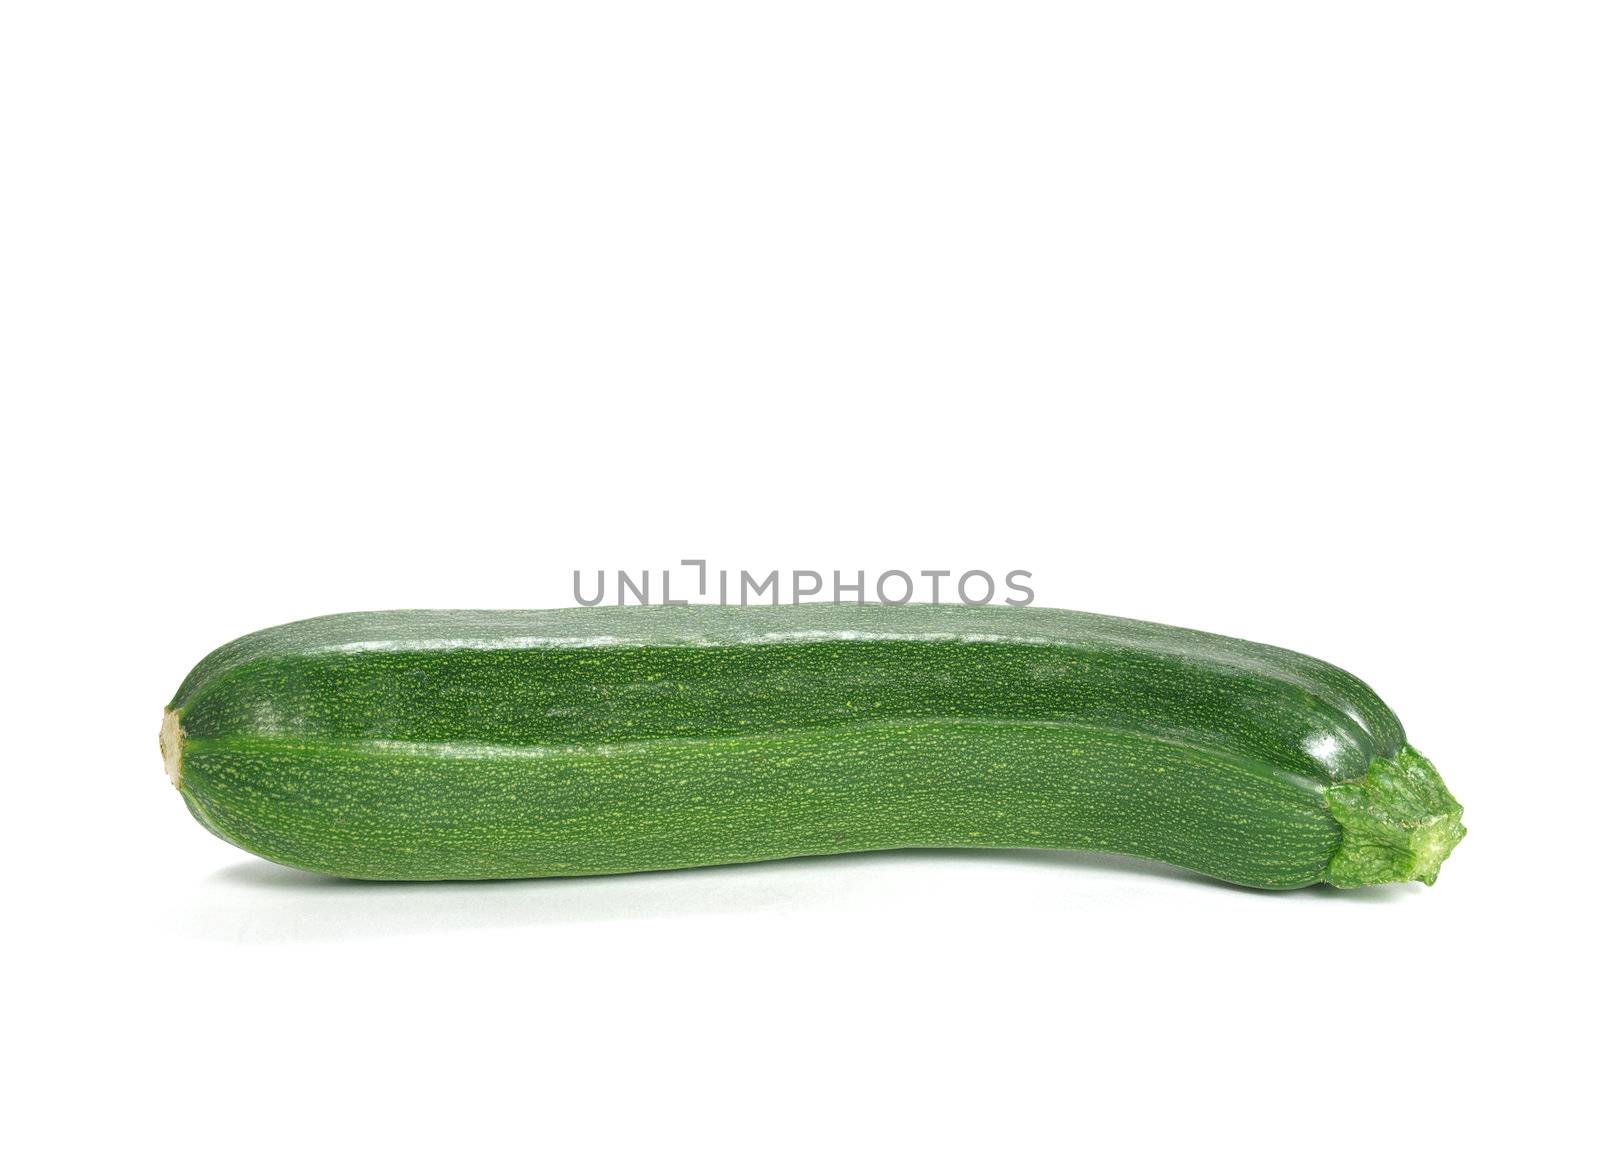 fresh and green courgette on white background